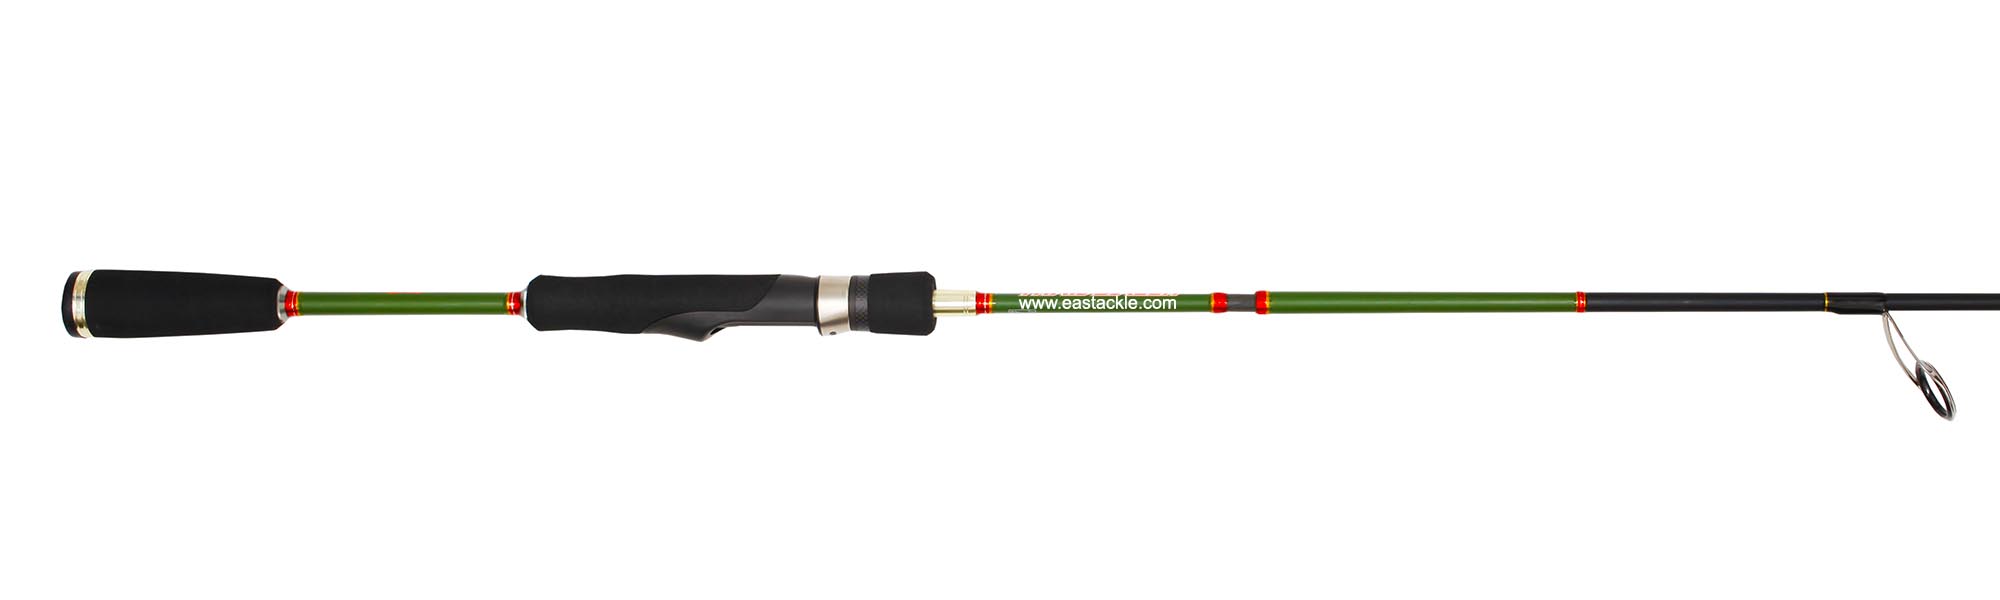 Rapala - Trail Blazer - TRS664MHRF - Spinning 4 Piece Travel Rod - Rear Section | Eastackle